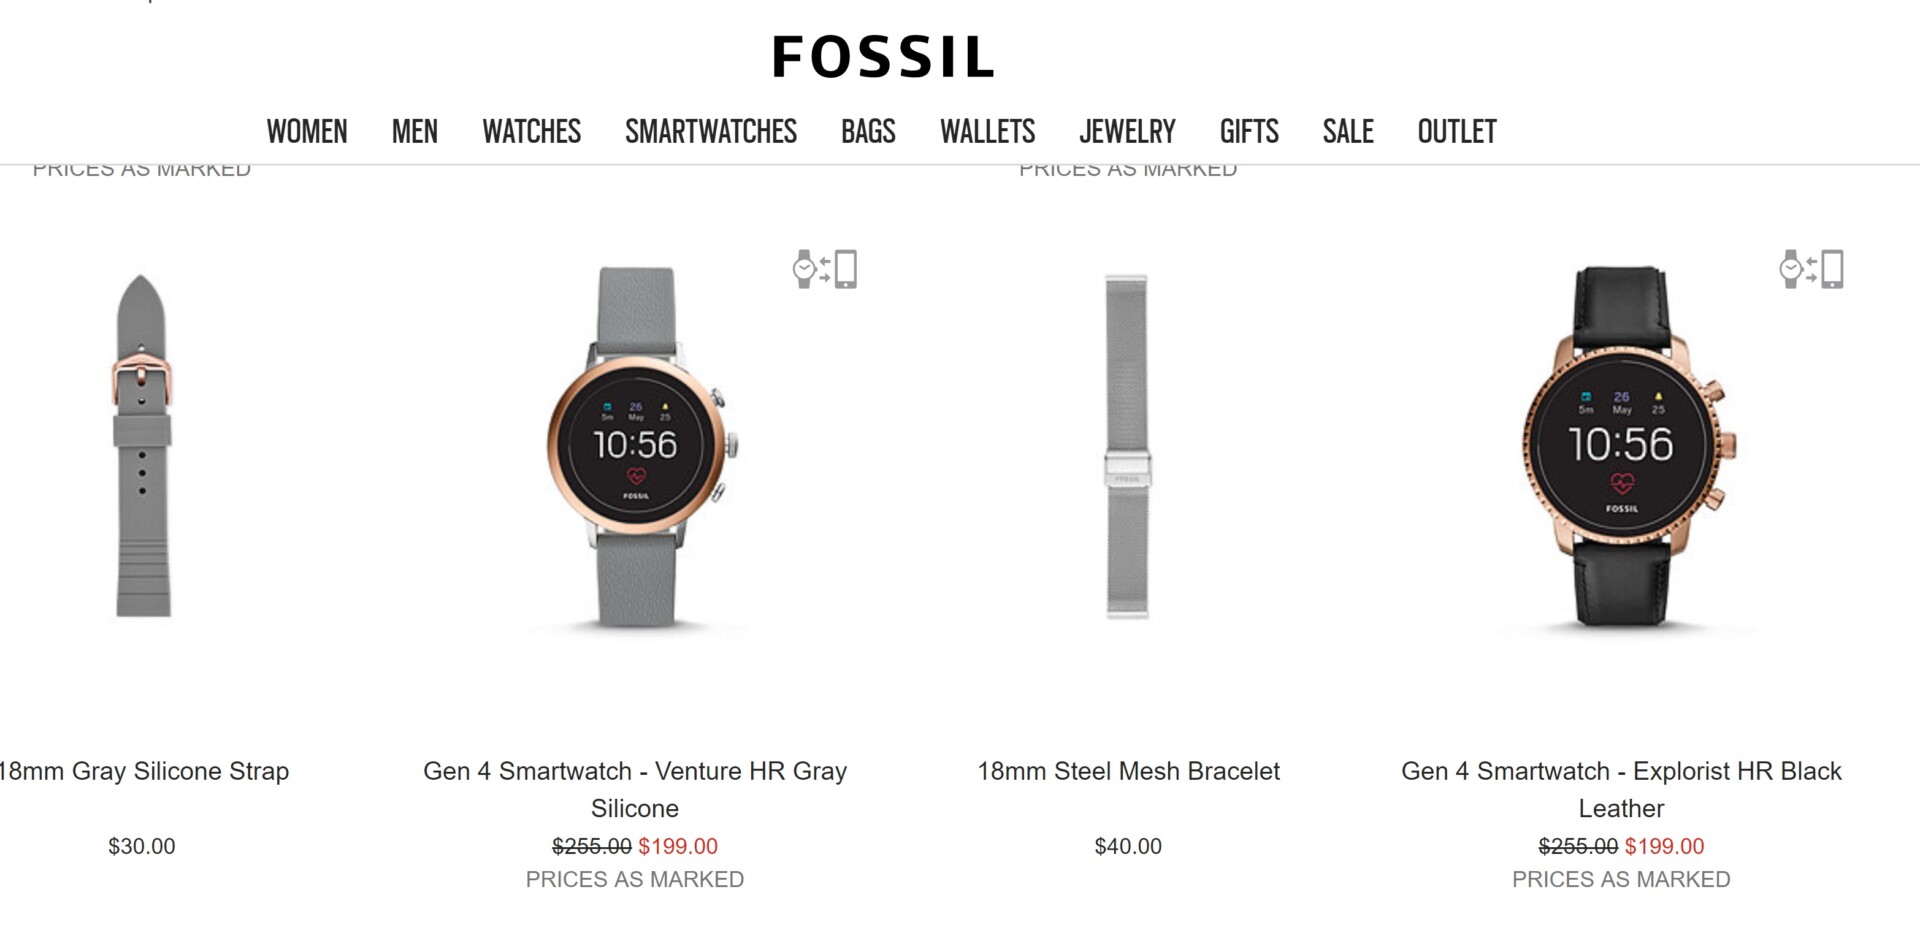 Fossil's smartwatch homepage.